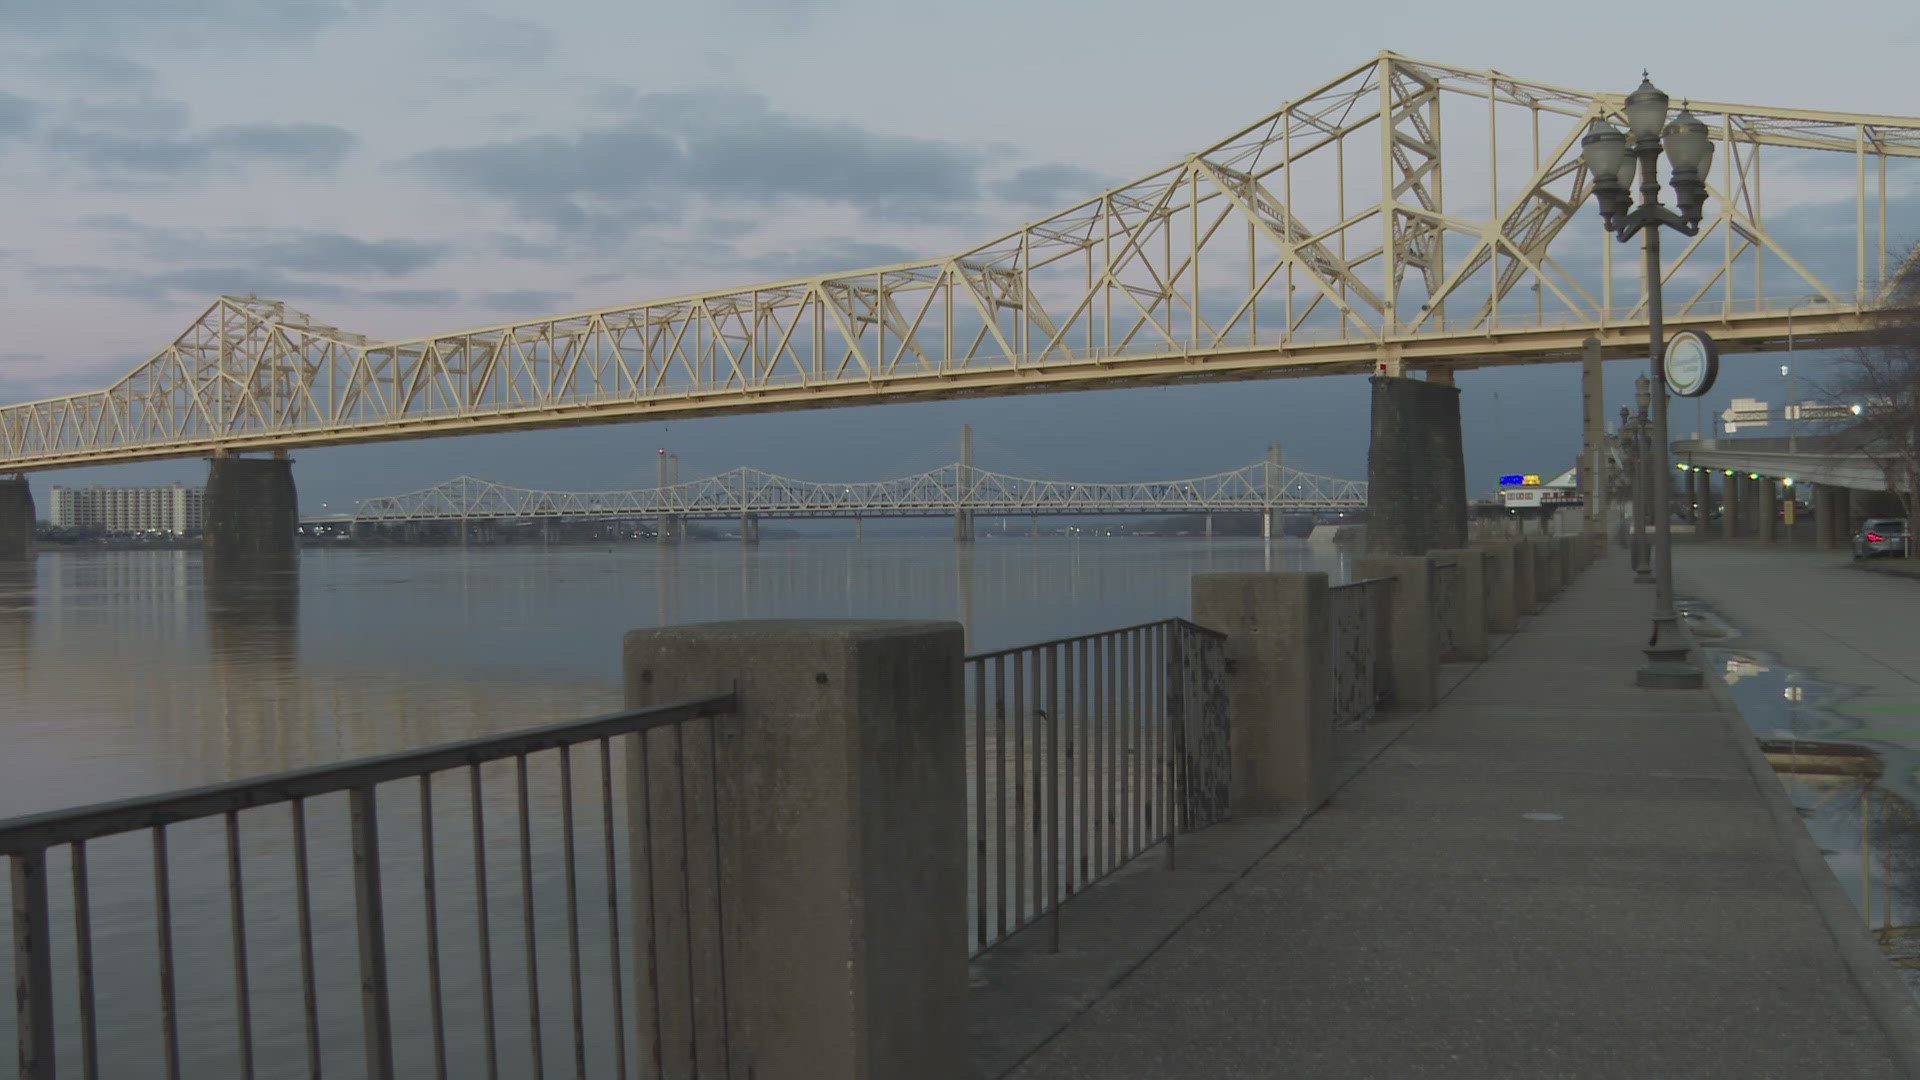 After 24 hours of around-the-clock repairs and exams, the Kentucky Transportation Cabinet said the Clark Memorial Bridge is safe for drivers.